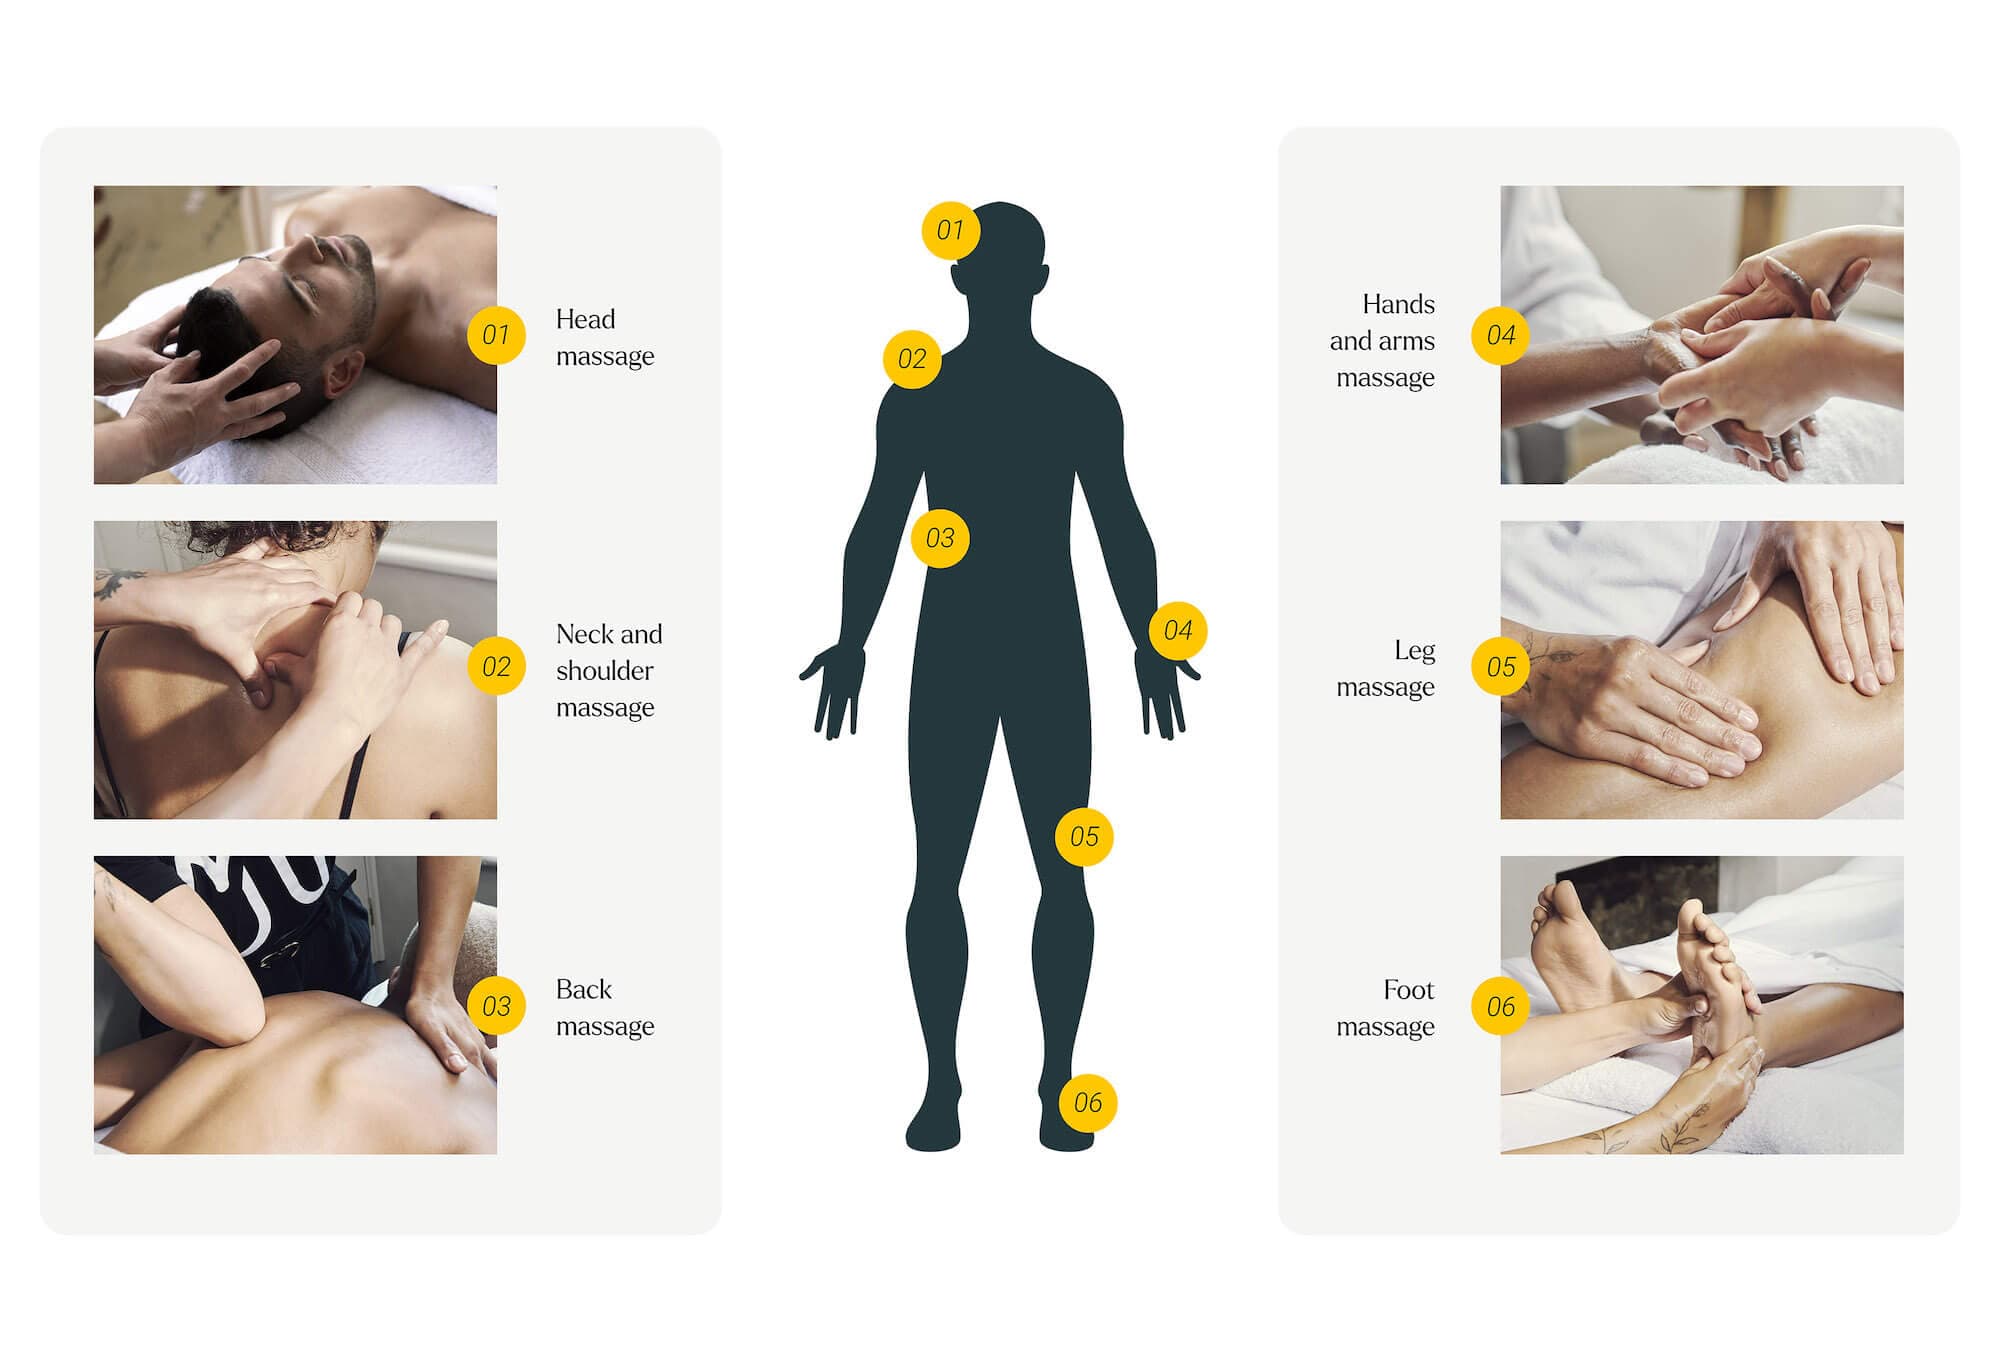 Areas of the body that are massaged during a full body massage infographic